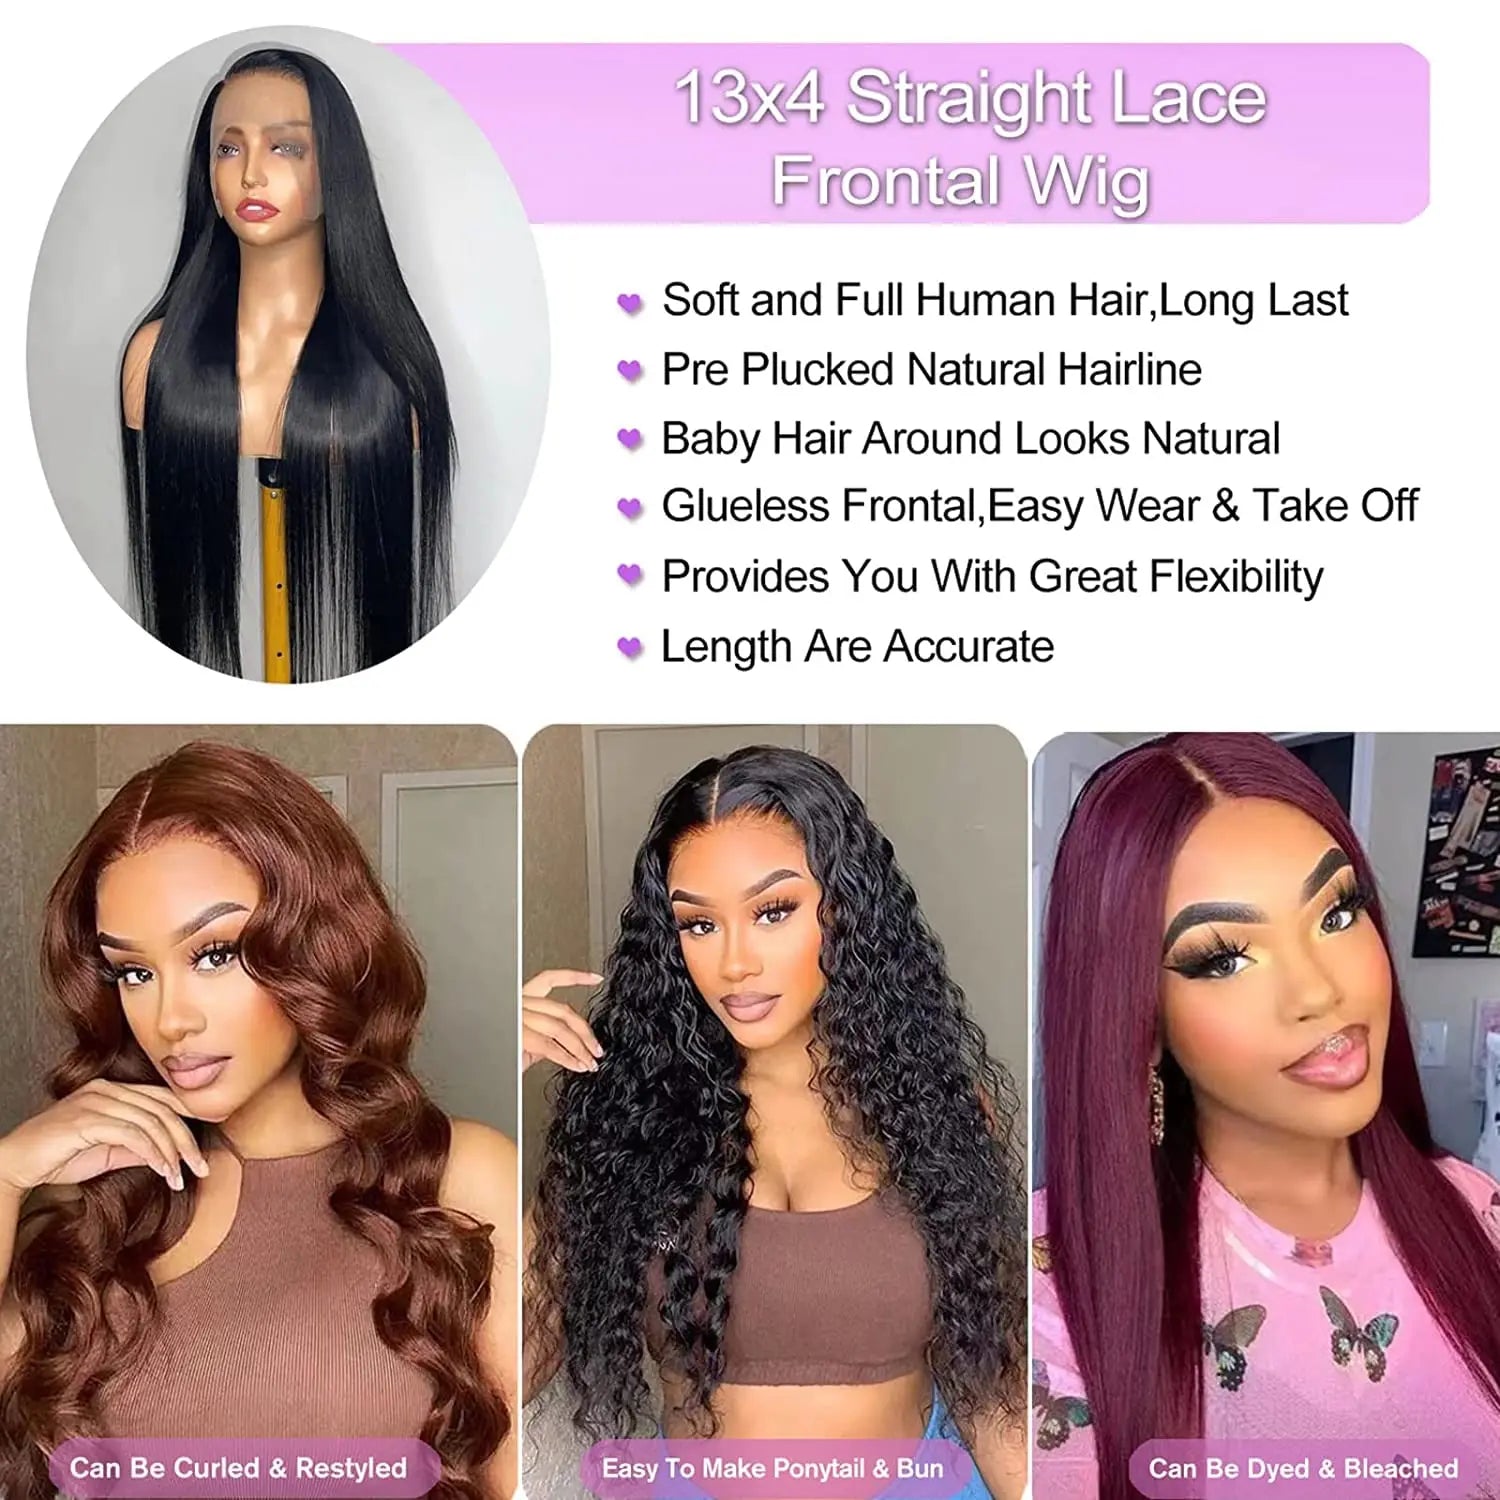 Premium Straight Lace Front Human Hair Wigs: Luxe Style and Comfort